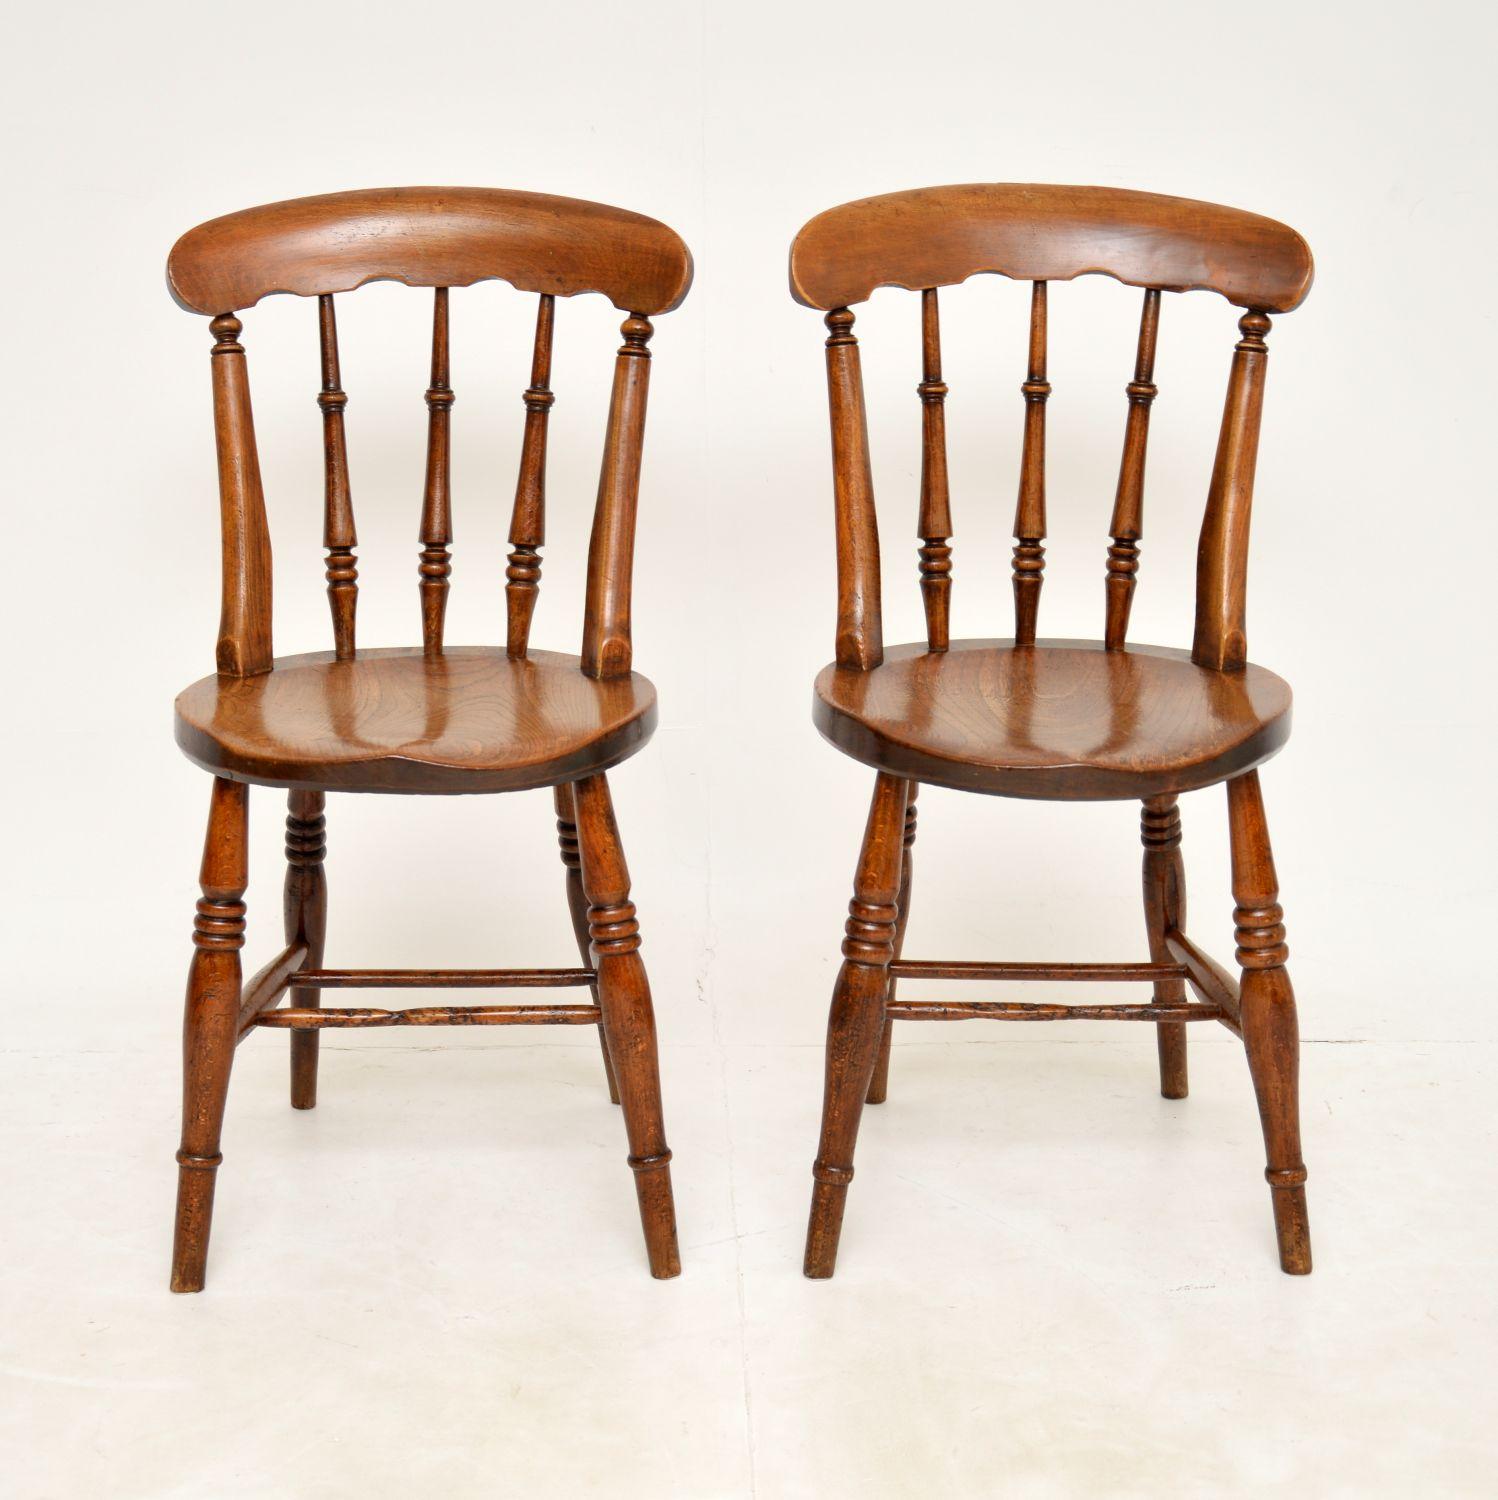 A wonderful pair of Victorian period side chairs in solid Elm. This were made in England, they date from around the 1860-1880’s.
They are really well made and are of super quality. They have a lovely design, are sturdy and comfortable. The solid